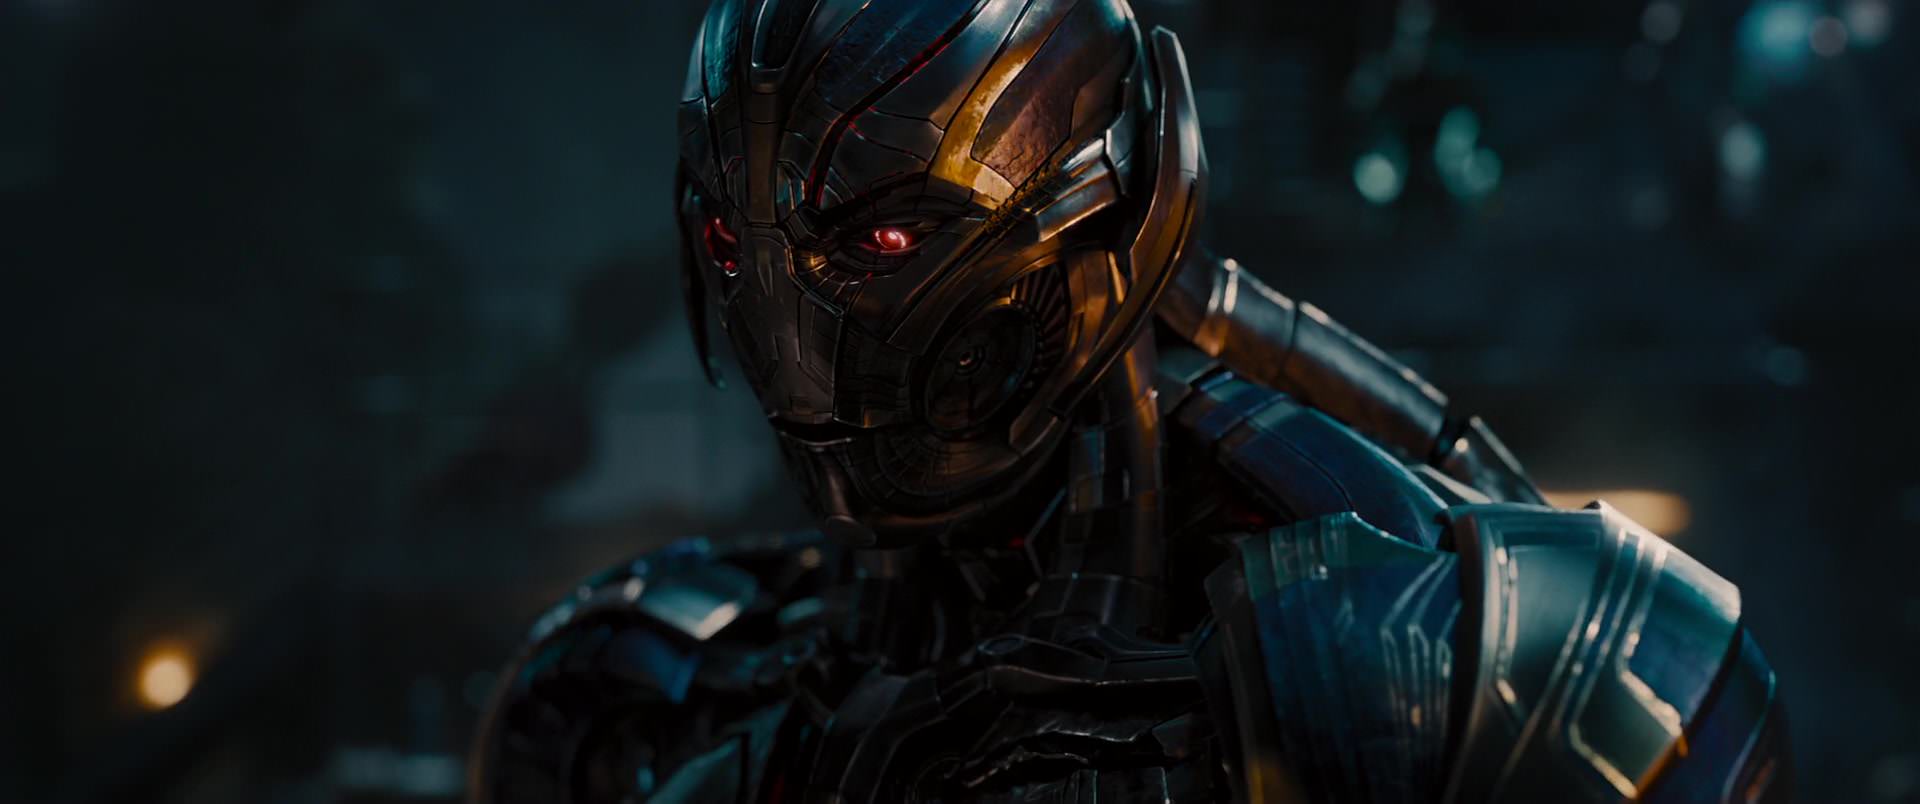 avengers age of ultron full movie in hindi download filmywap